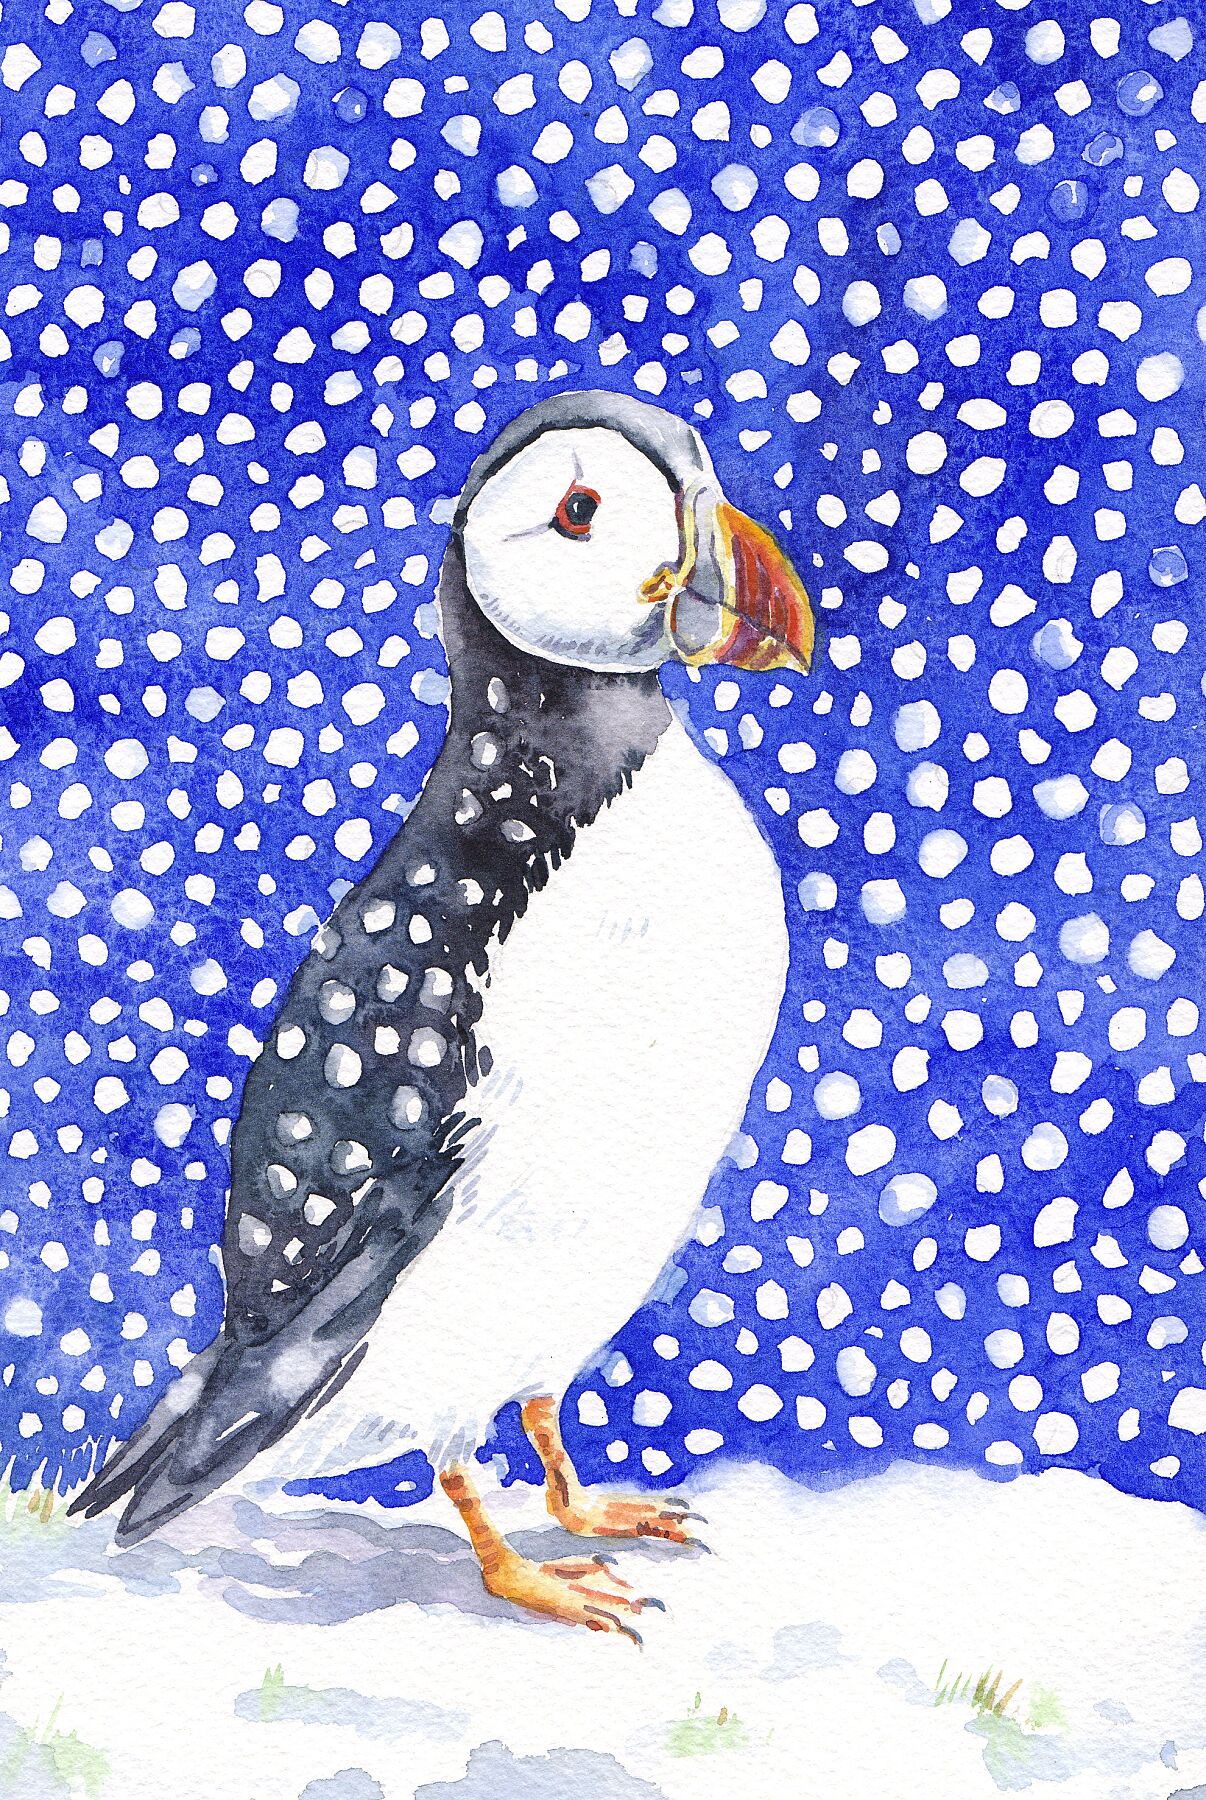 limited edition print of a puffin with snow flakes falling in the sky behind